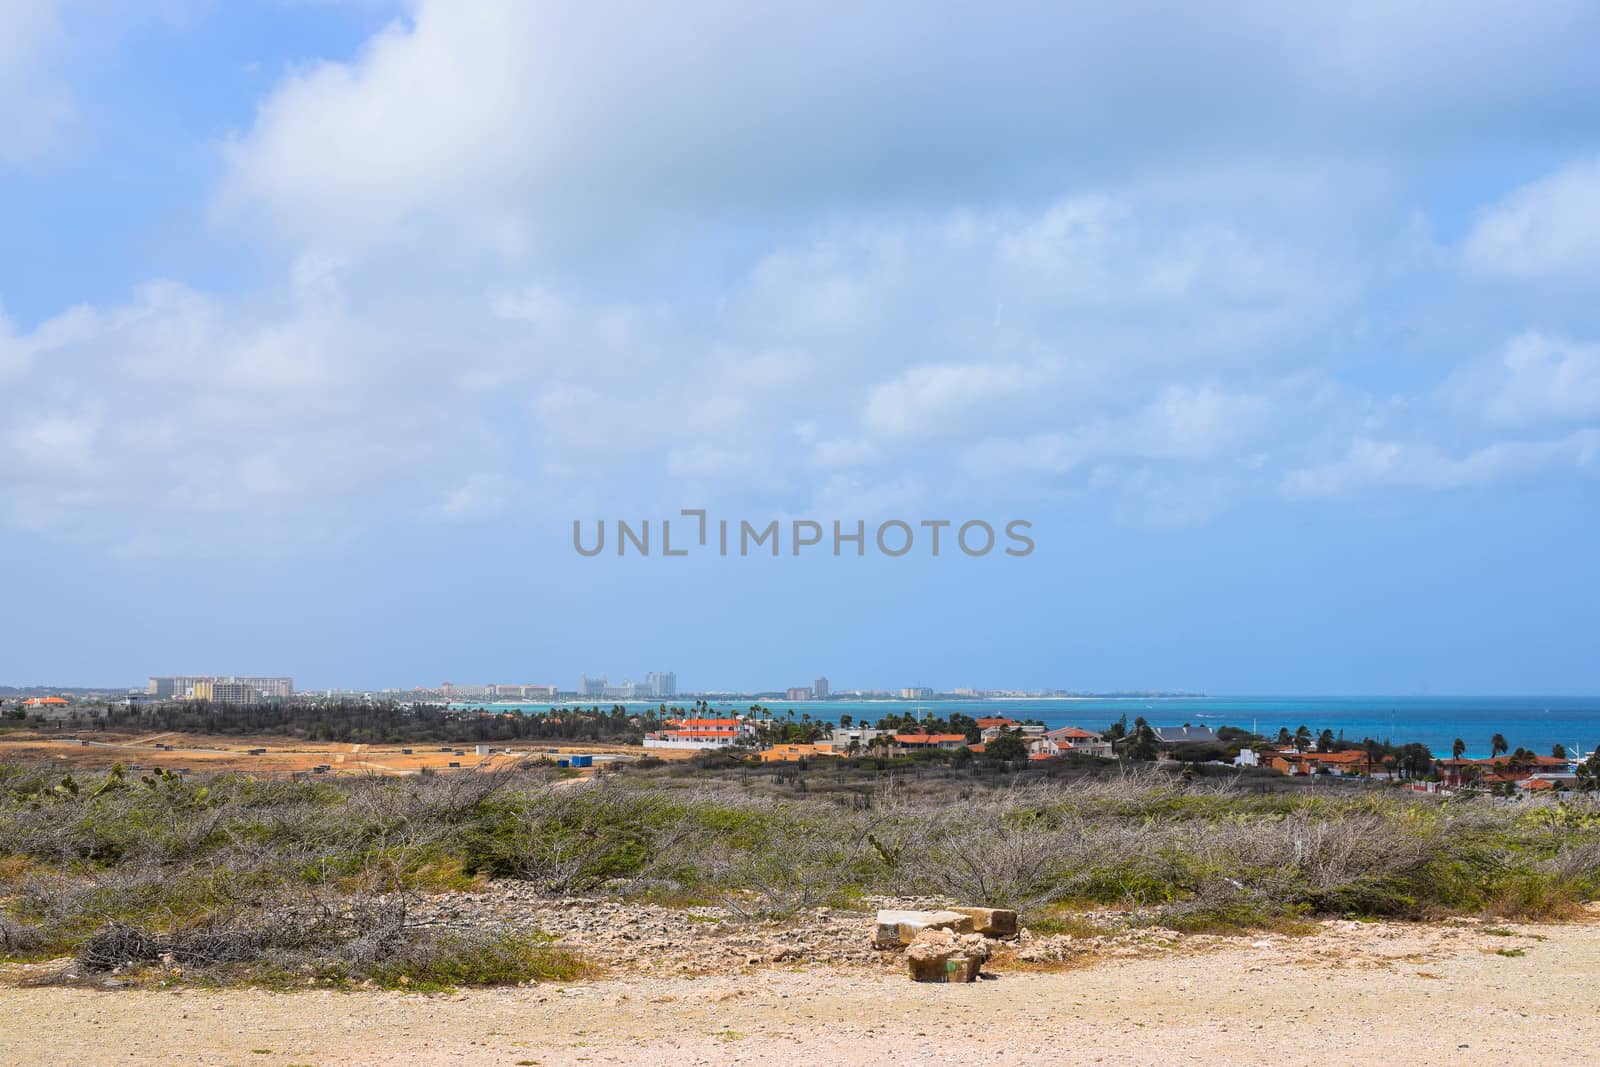 Arikok Natural Park on the island of Aruba in the Caribbean Sea with deserts and ocean waves on the rocky coast by matteobartolini